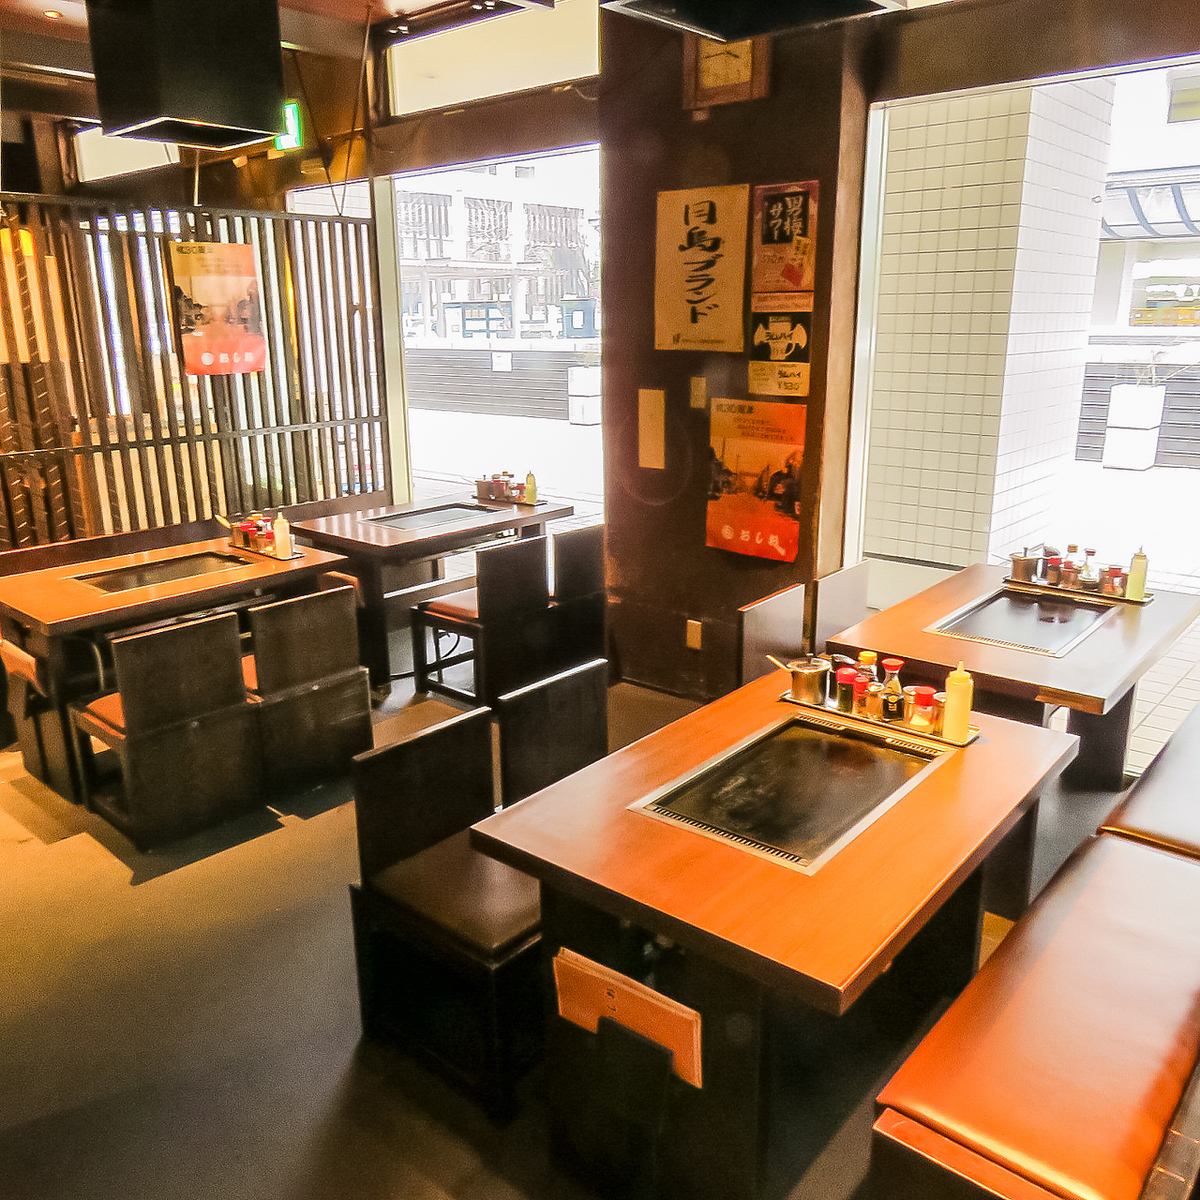 About a 1-minute walk from the station! Table seats and tatami mat seats are available!